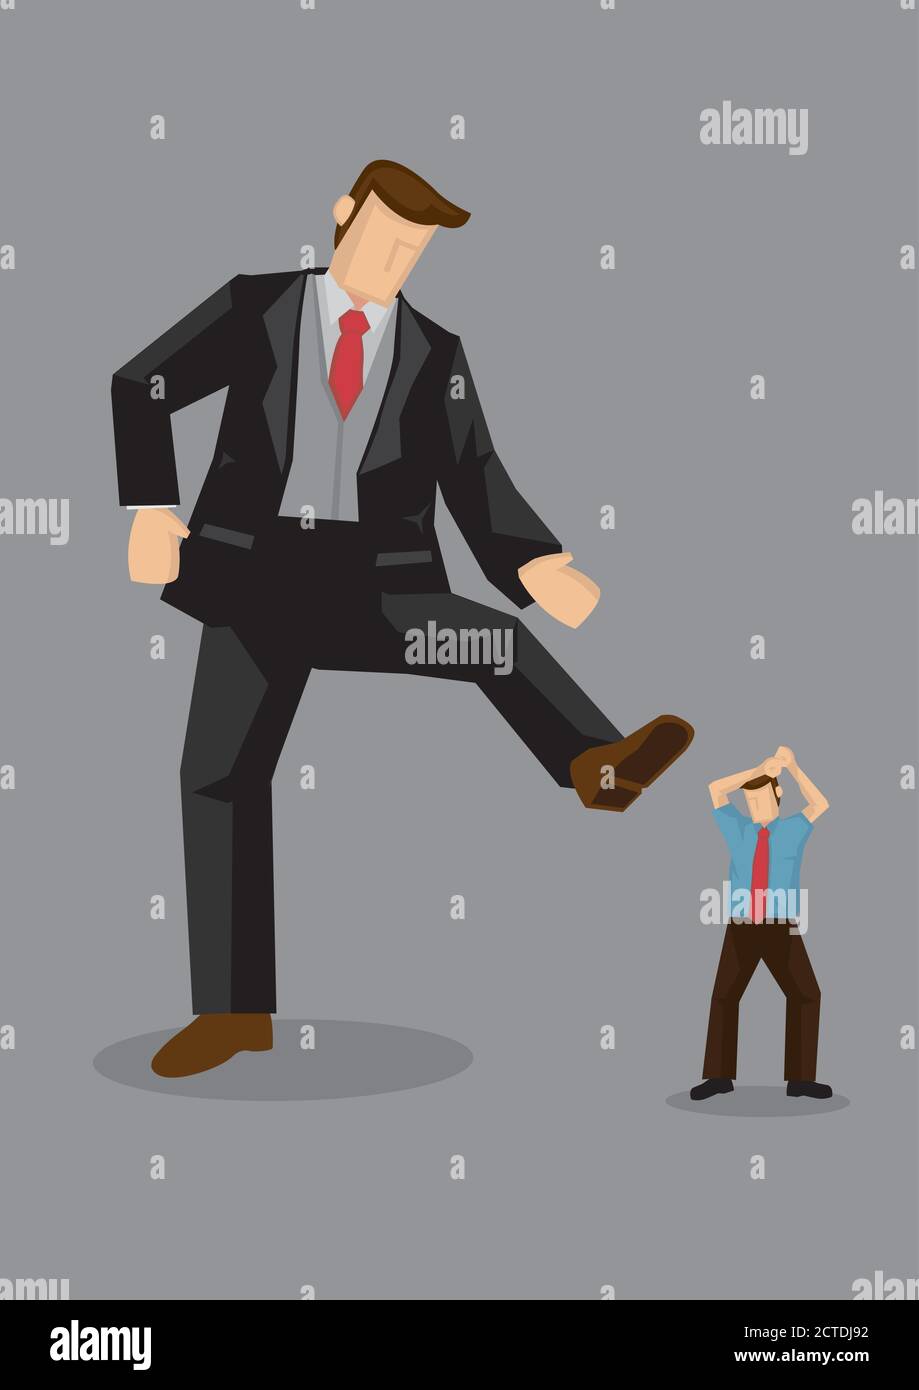 A giant rich man raising his foot to step on smaller man. Creative vector illustration on stepping on others metaphor isolated on grey background. Stock Vector